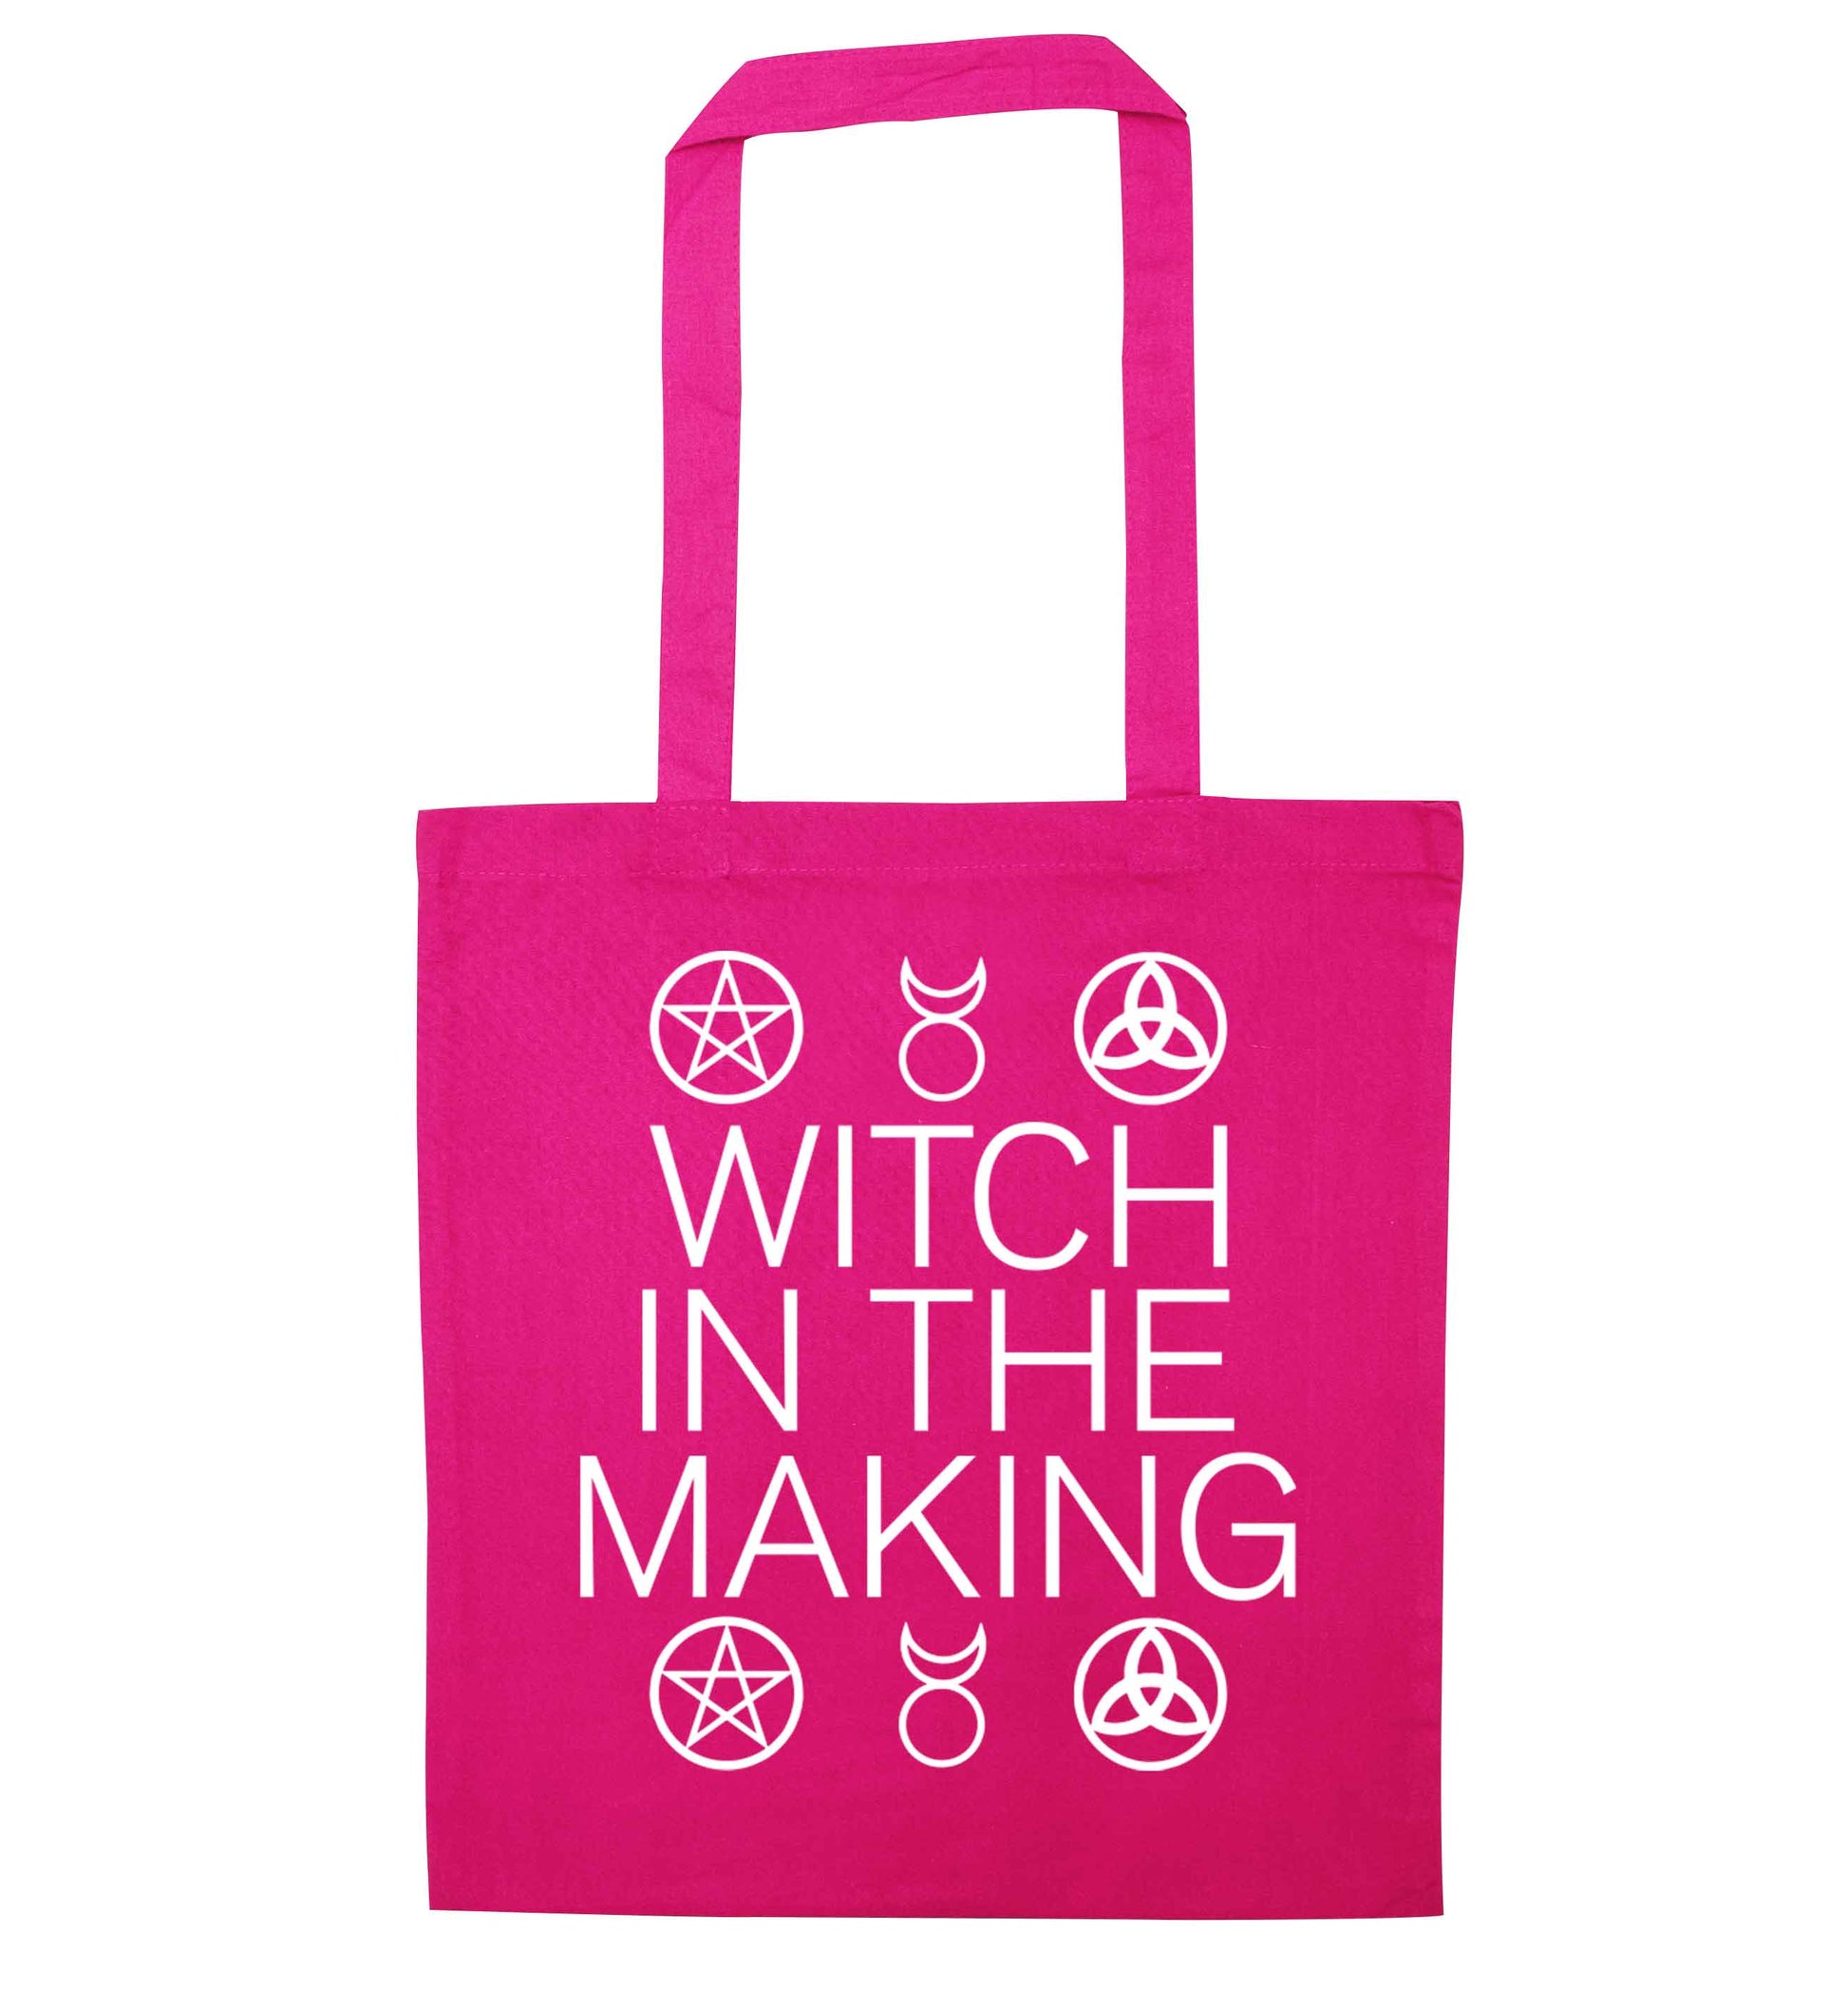 Witch in the making pink tote bag